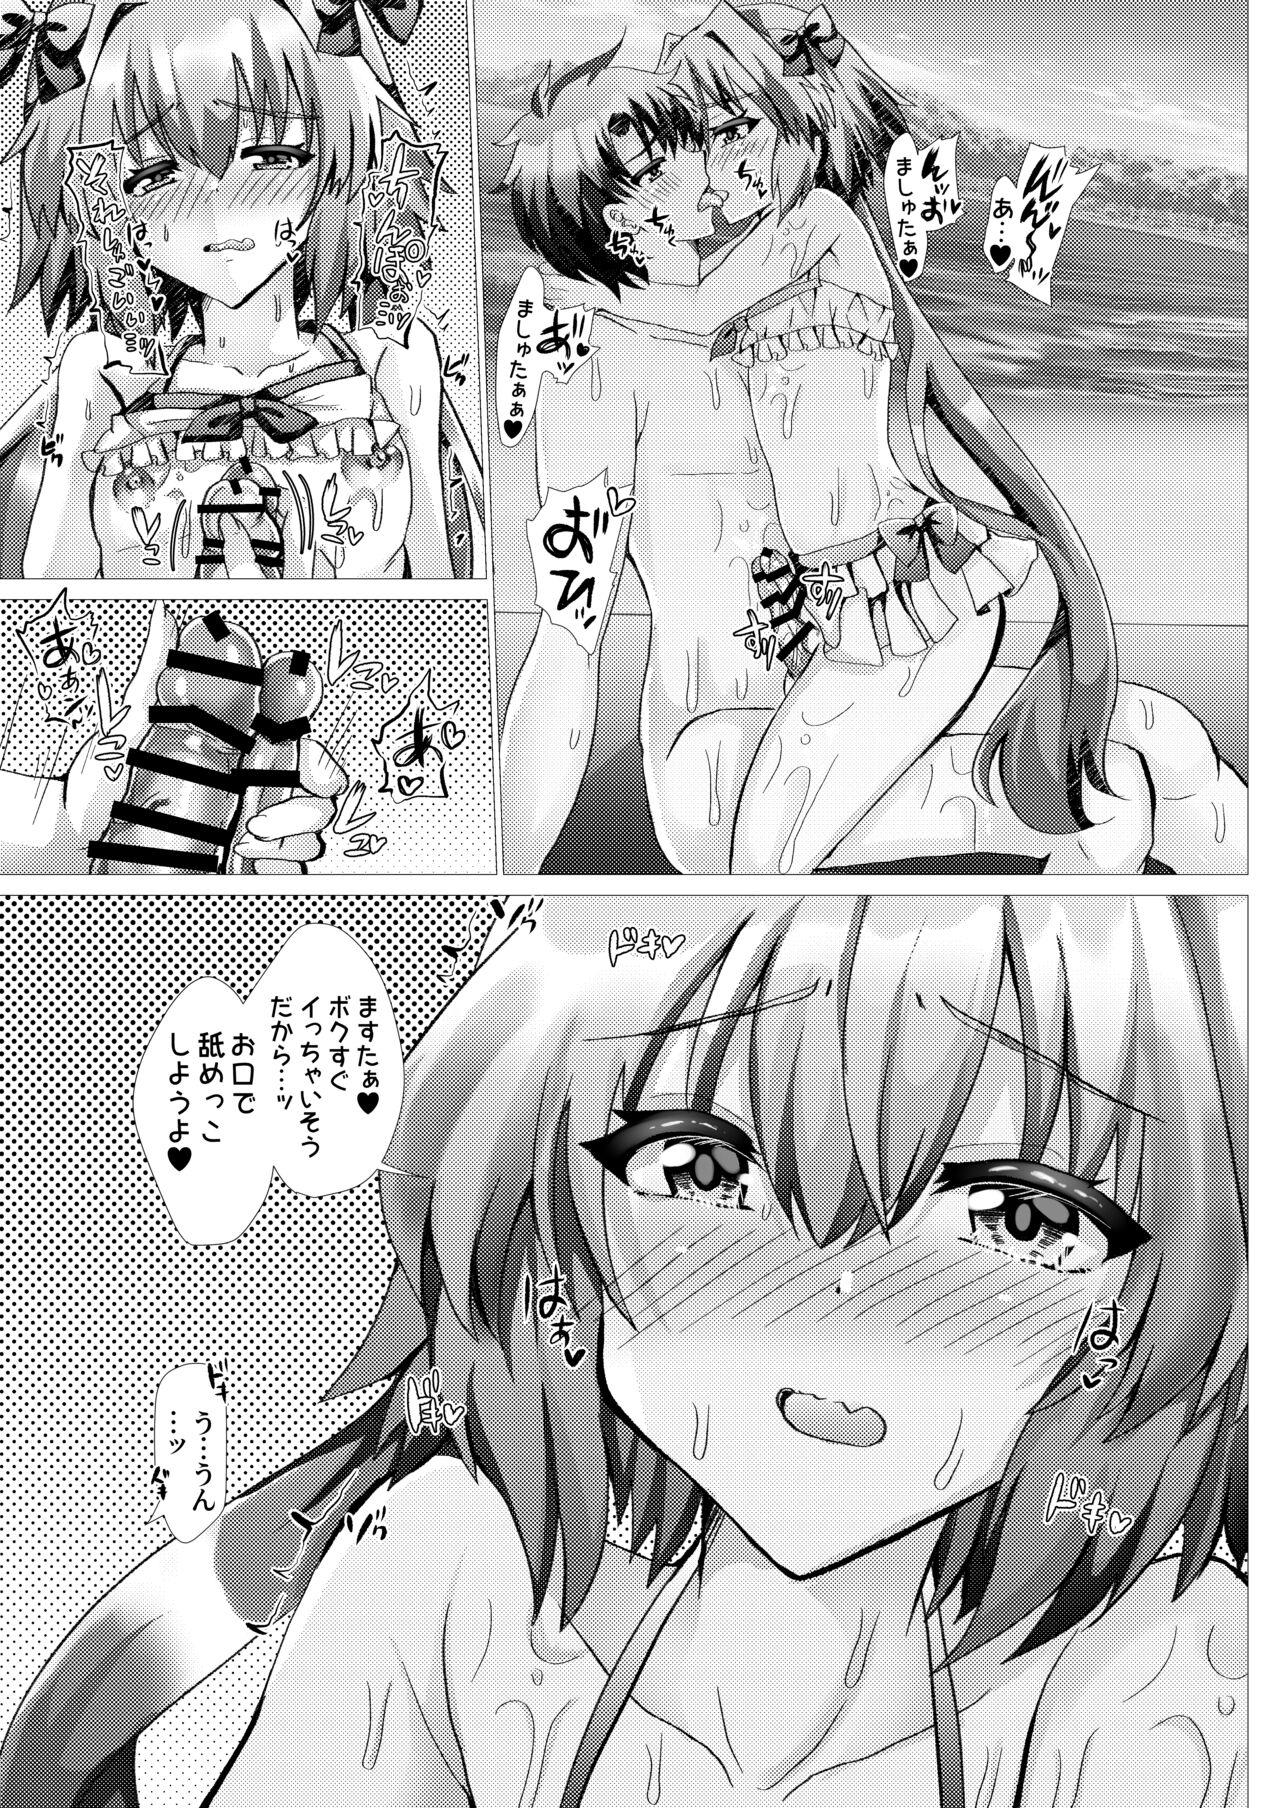 Pasivo Astolfo to Summer Vacation + Omake - Fate grand order Cumshot - Page 10